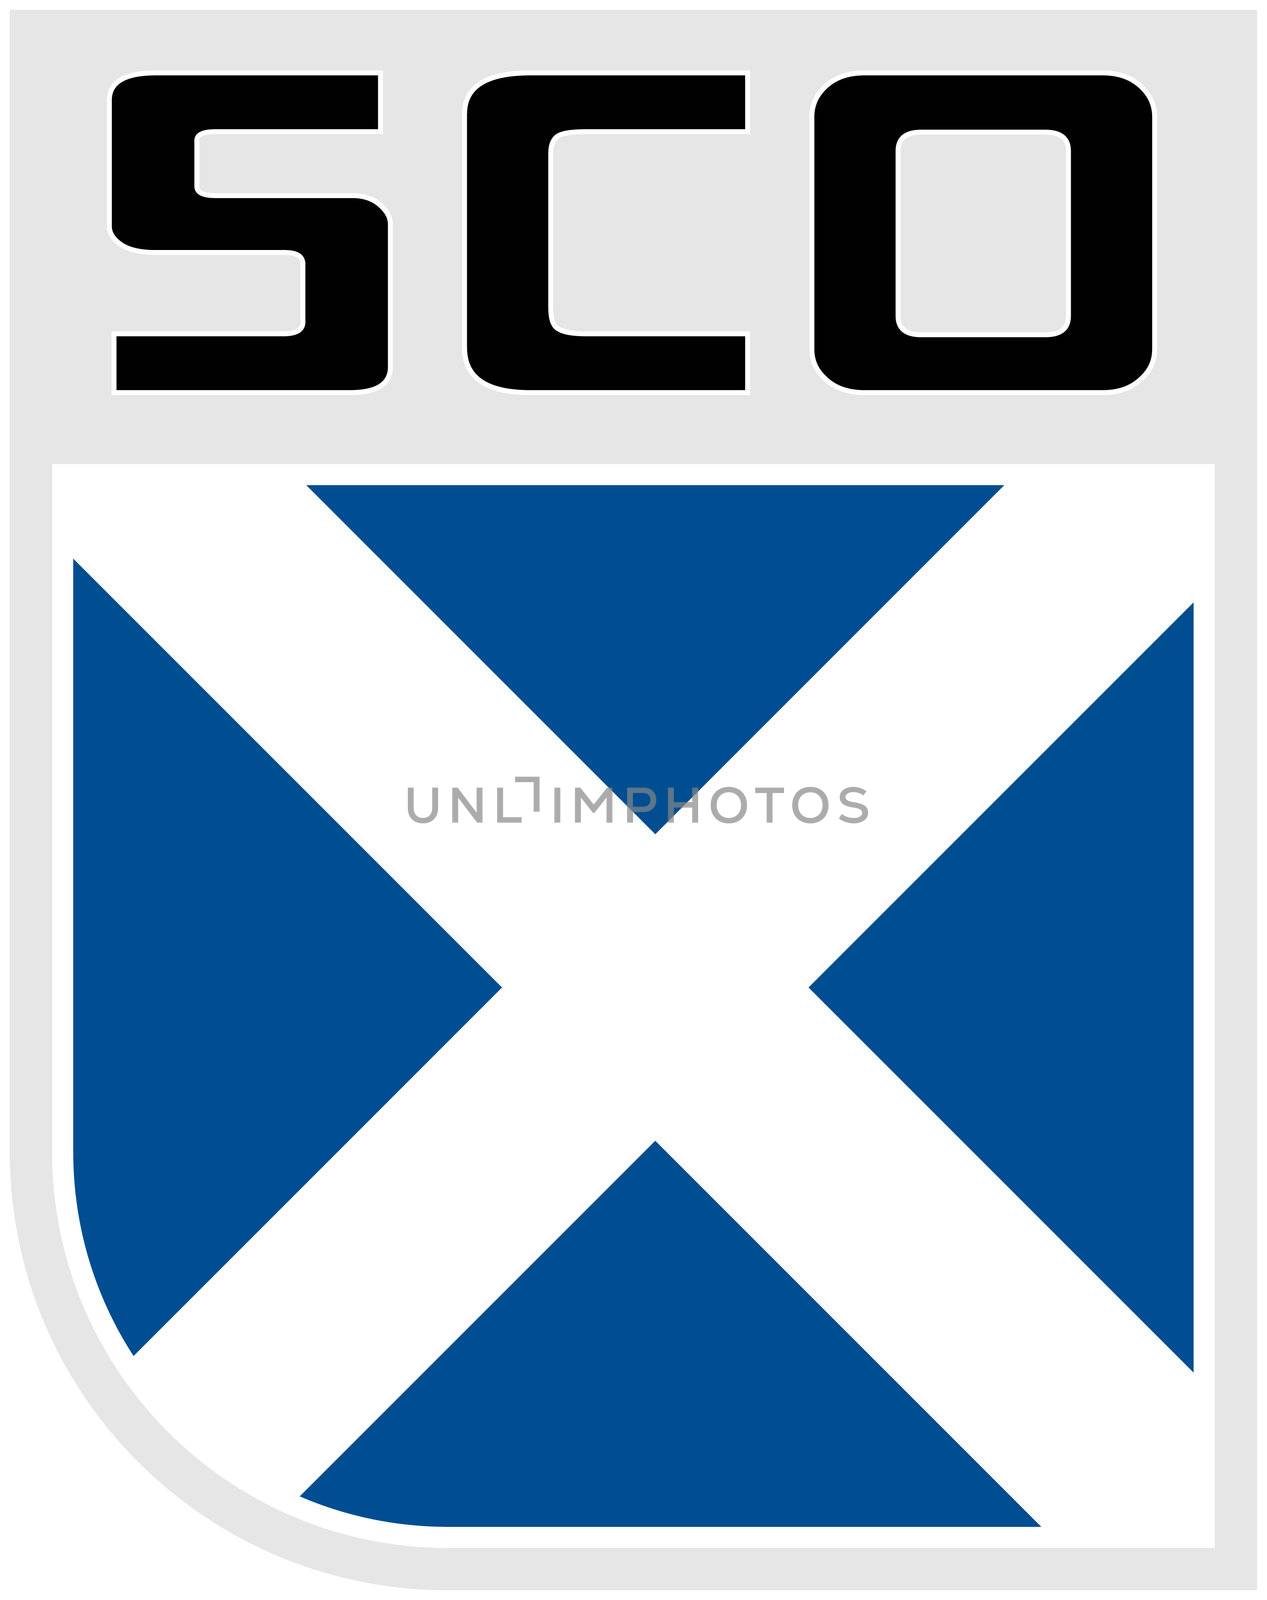 Illustration an icon of the Flag of Scotland